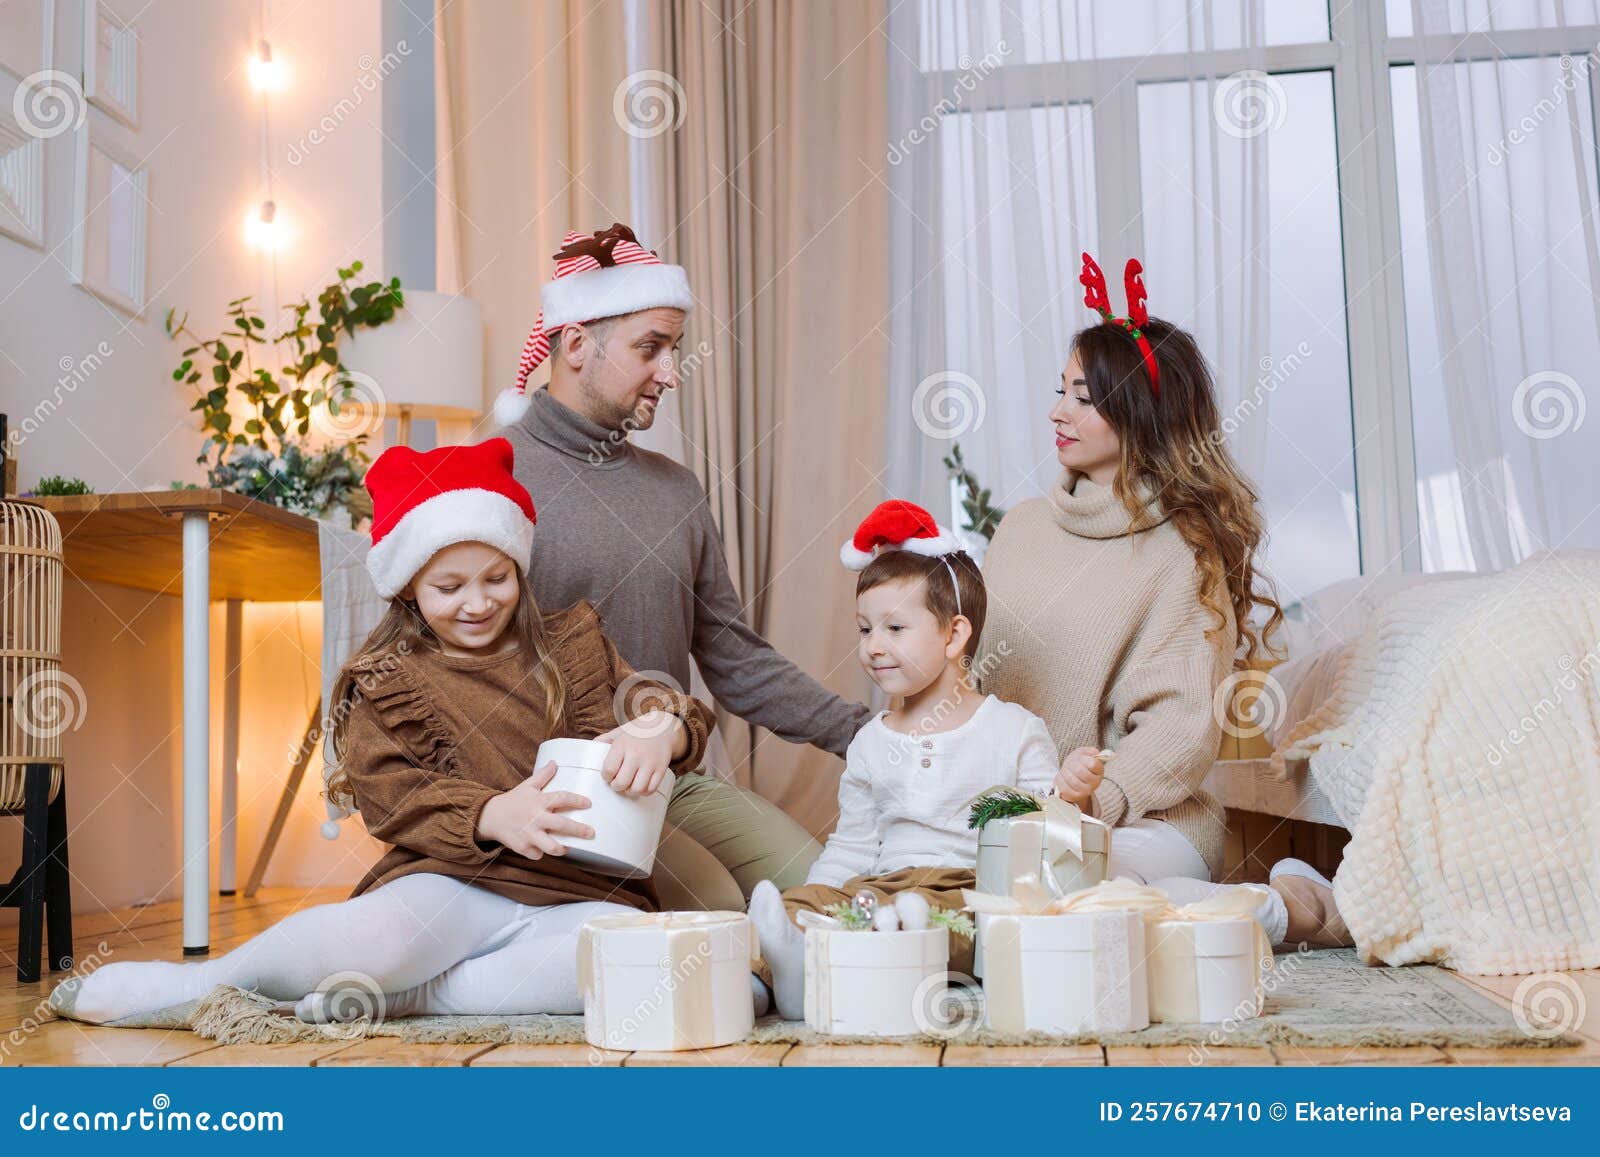 https://thumbs.dreamstime.com/z/merry-christmas-happy-holidays-cheerful-mom-dad-her-cute-daughter-son-exchange-gifts-santa-hats-parents-two-small-257674710.jpg